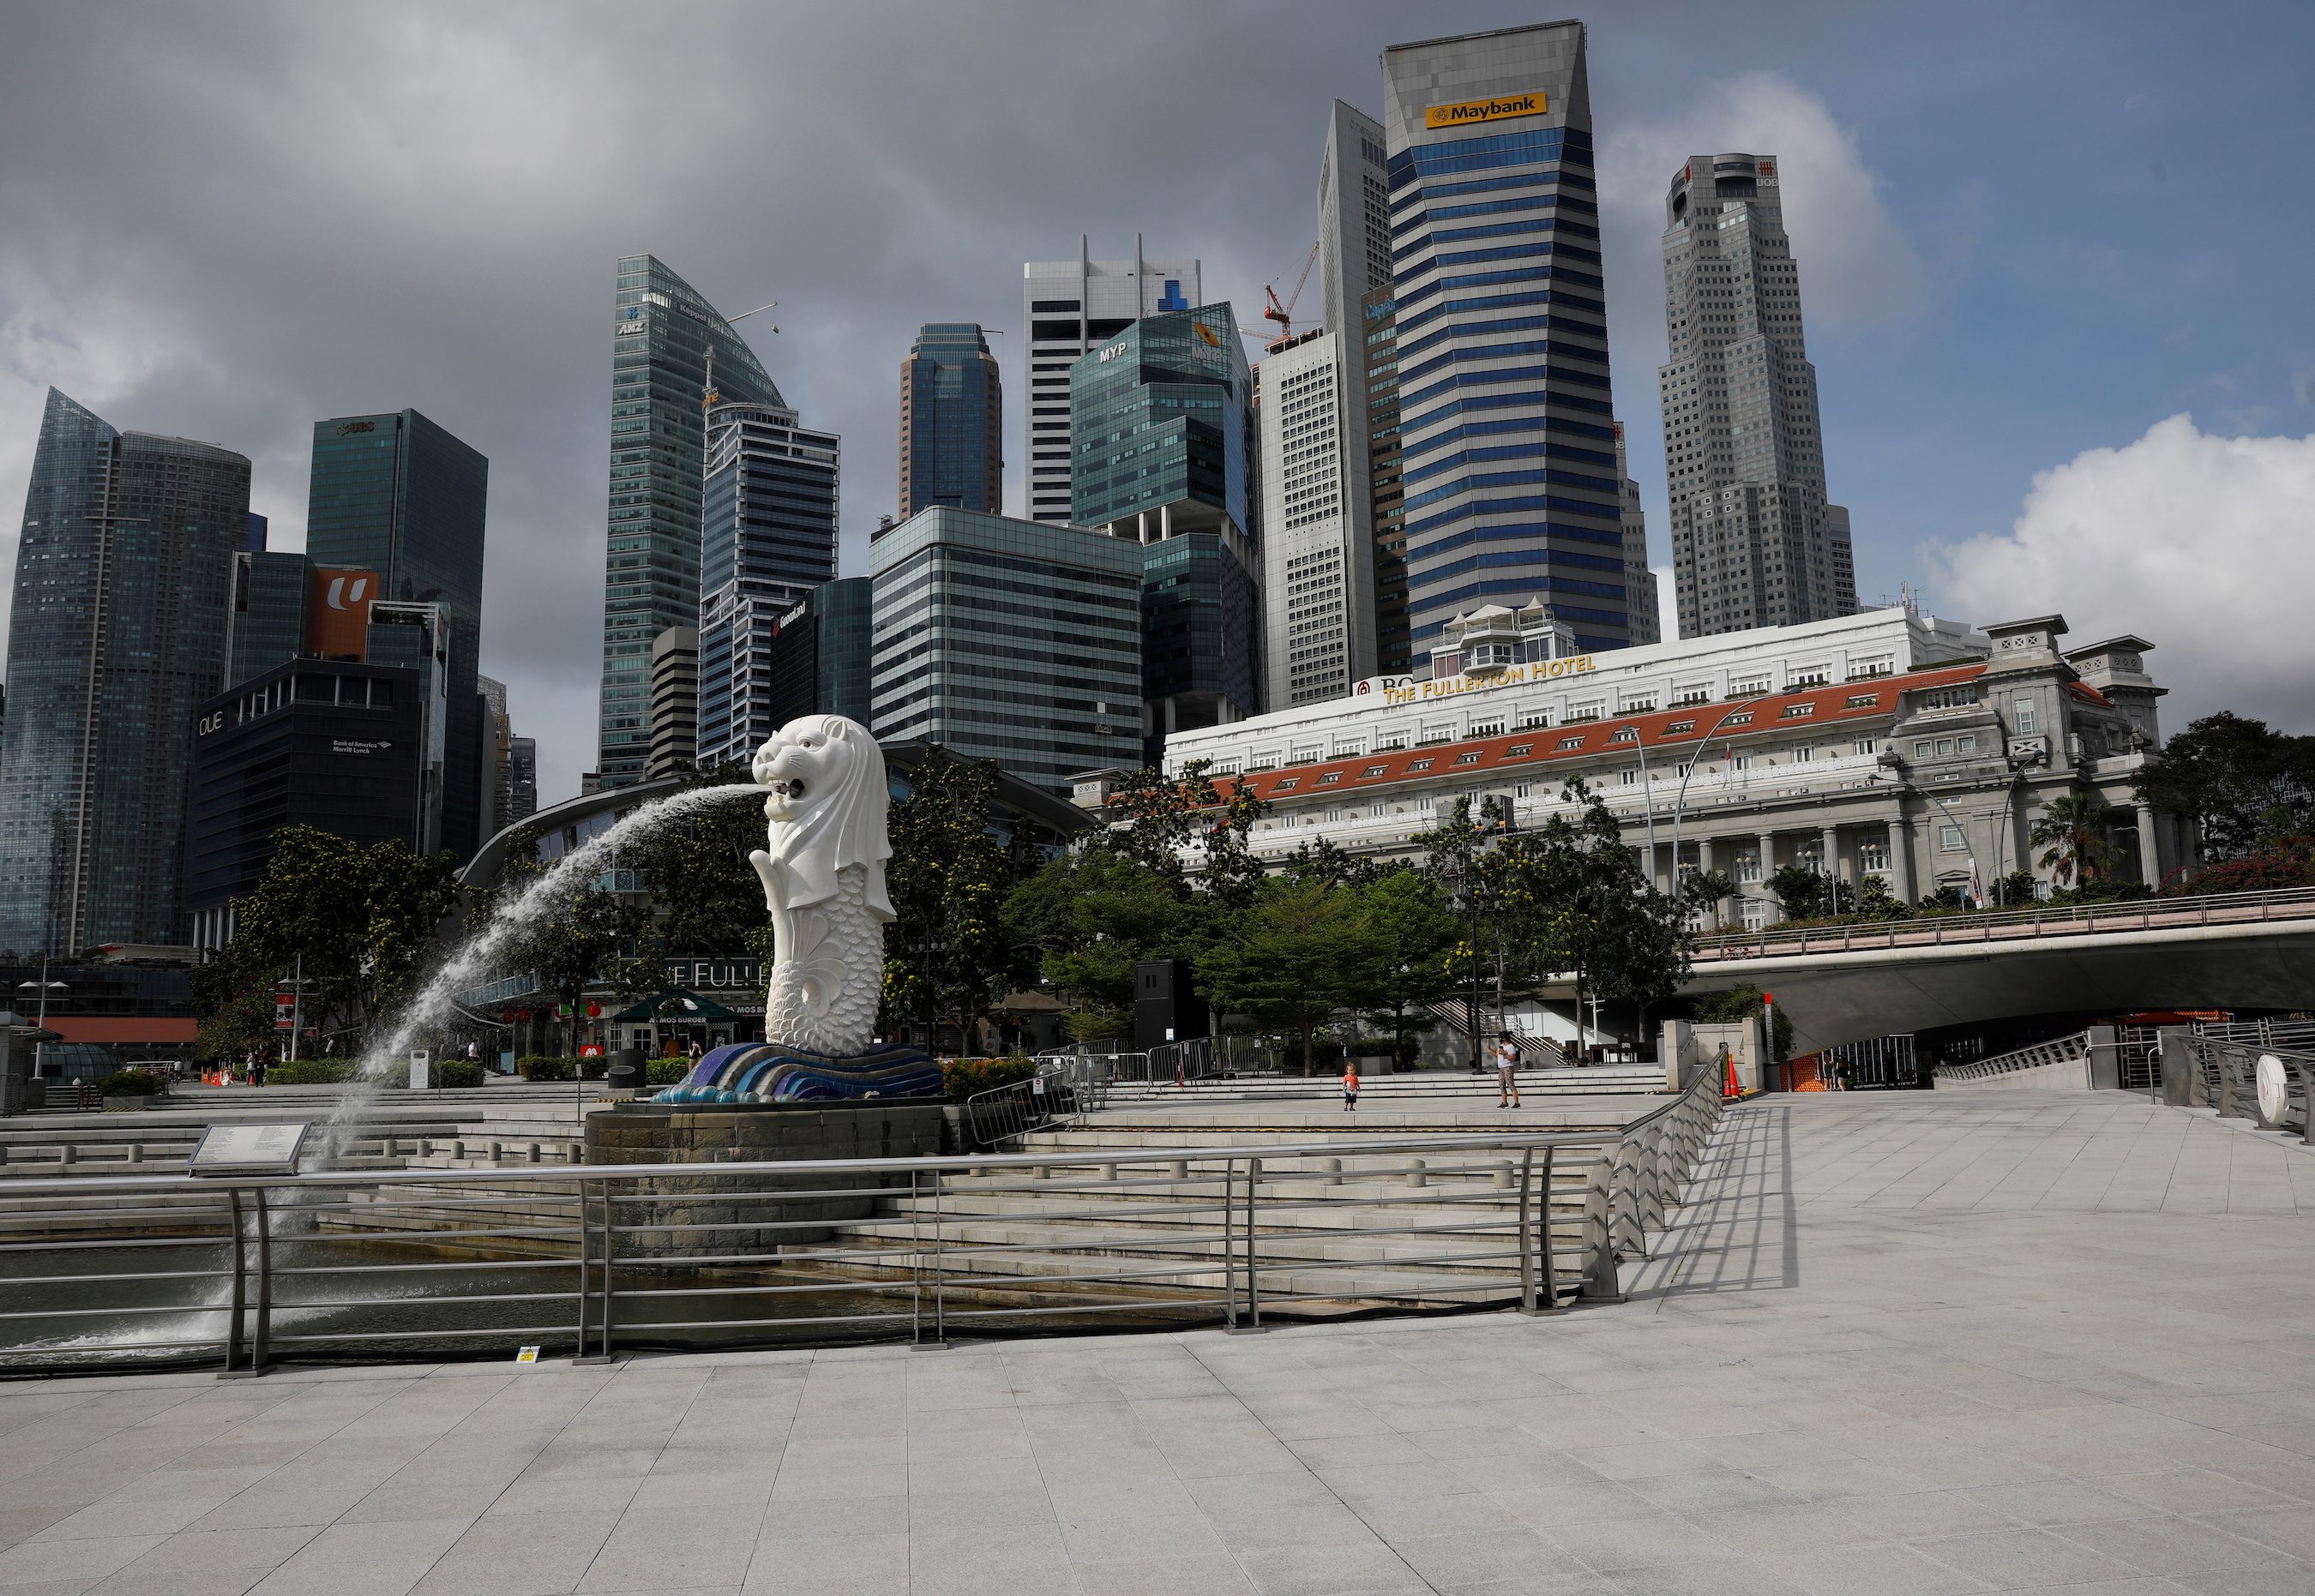 Singapore on path to recovery as Q4 2020 GDP shrinks less than estimated